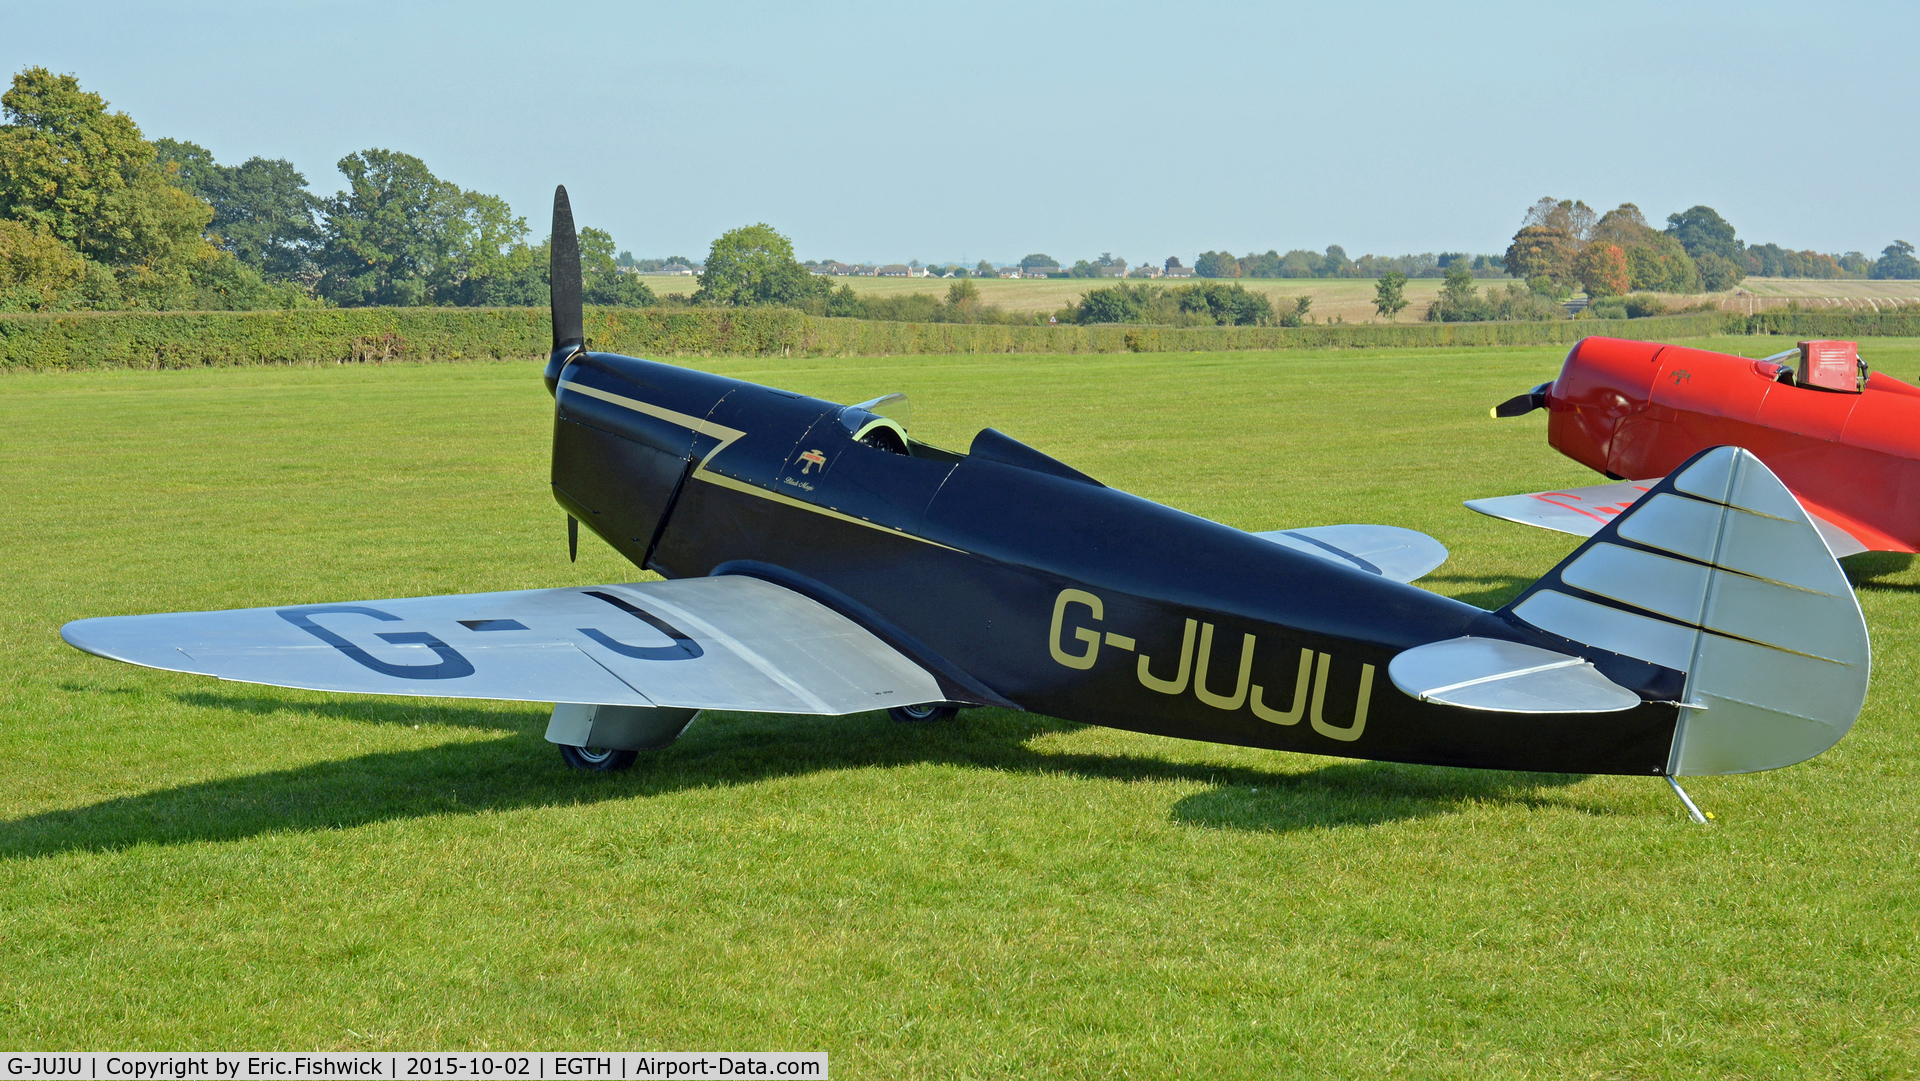 G-JUJU, 2014 Chilton DW1A C/N PFA 225-12726, 1. G-JUJU visiting The Shuttleworth Collection, Old Warden, Biggleswade, Bedfordshire.